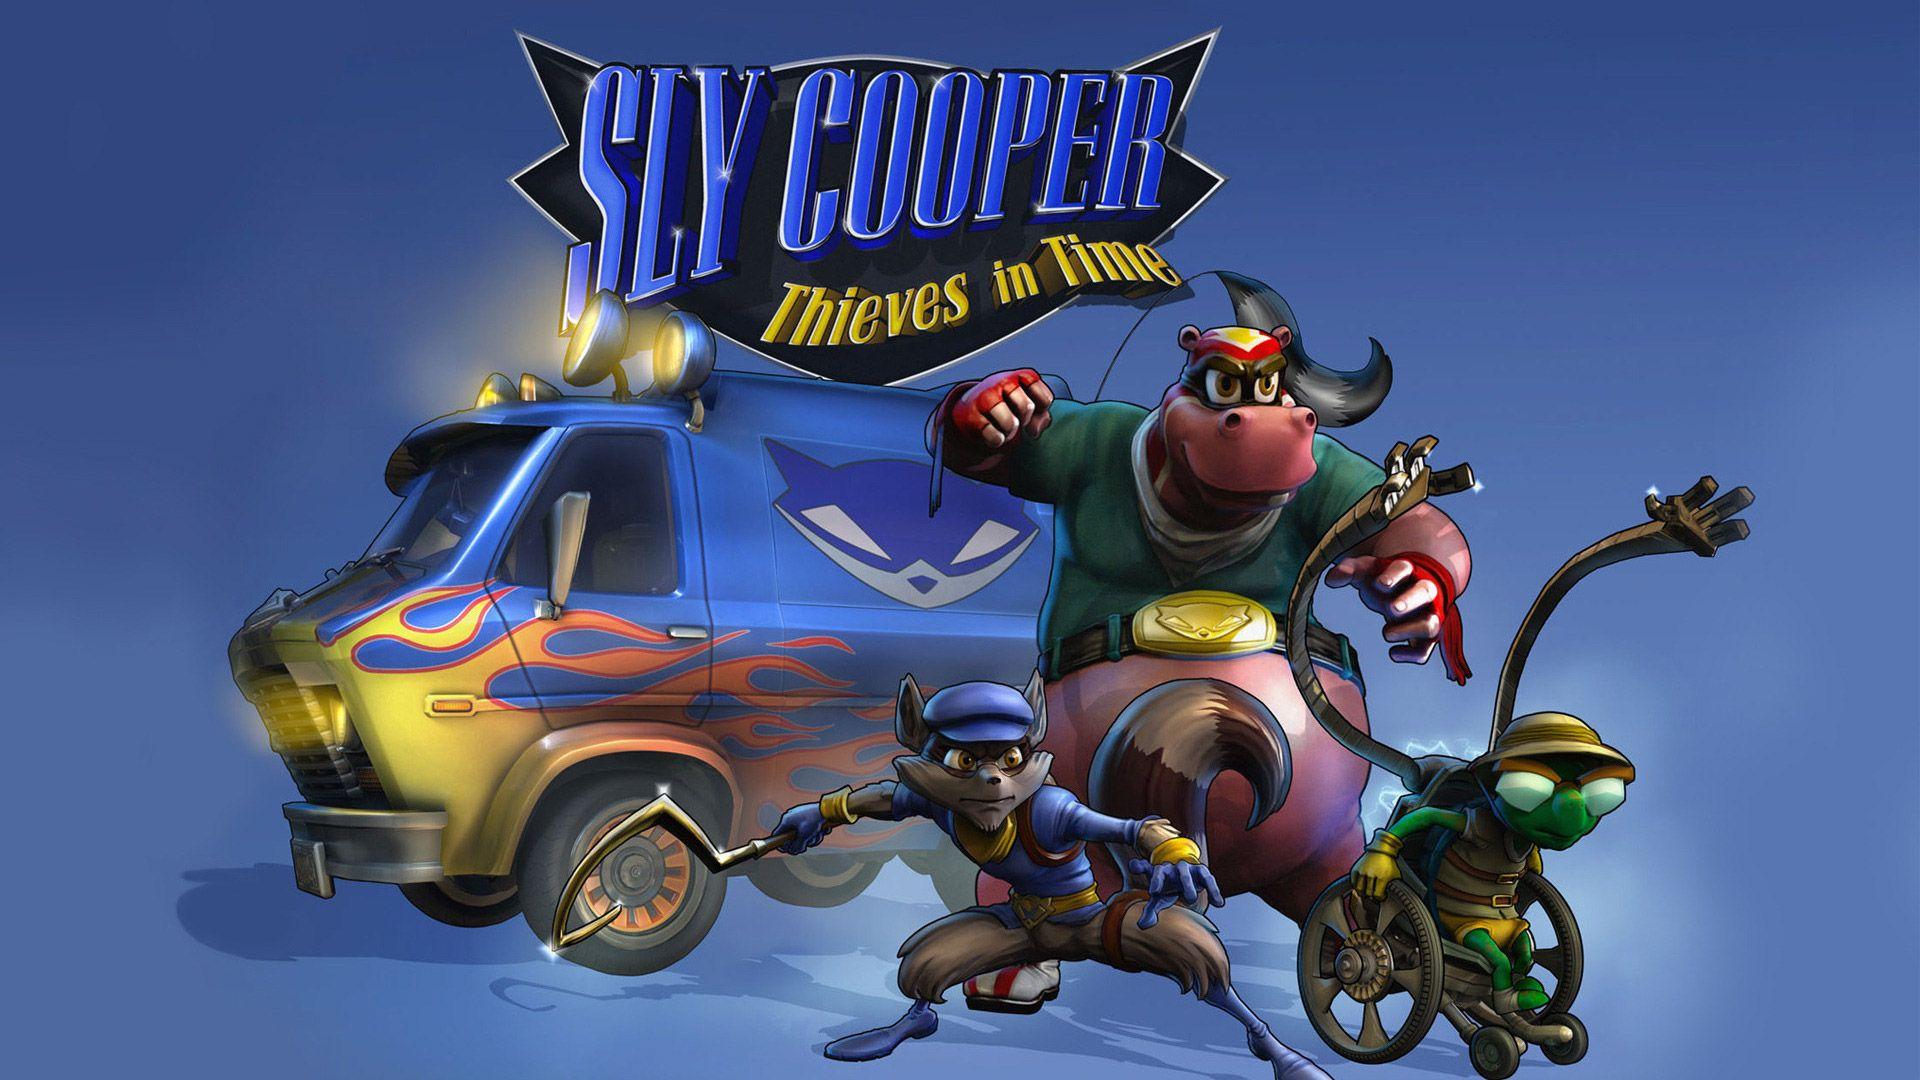 Sly cooper thieves in time background